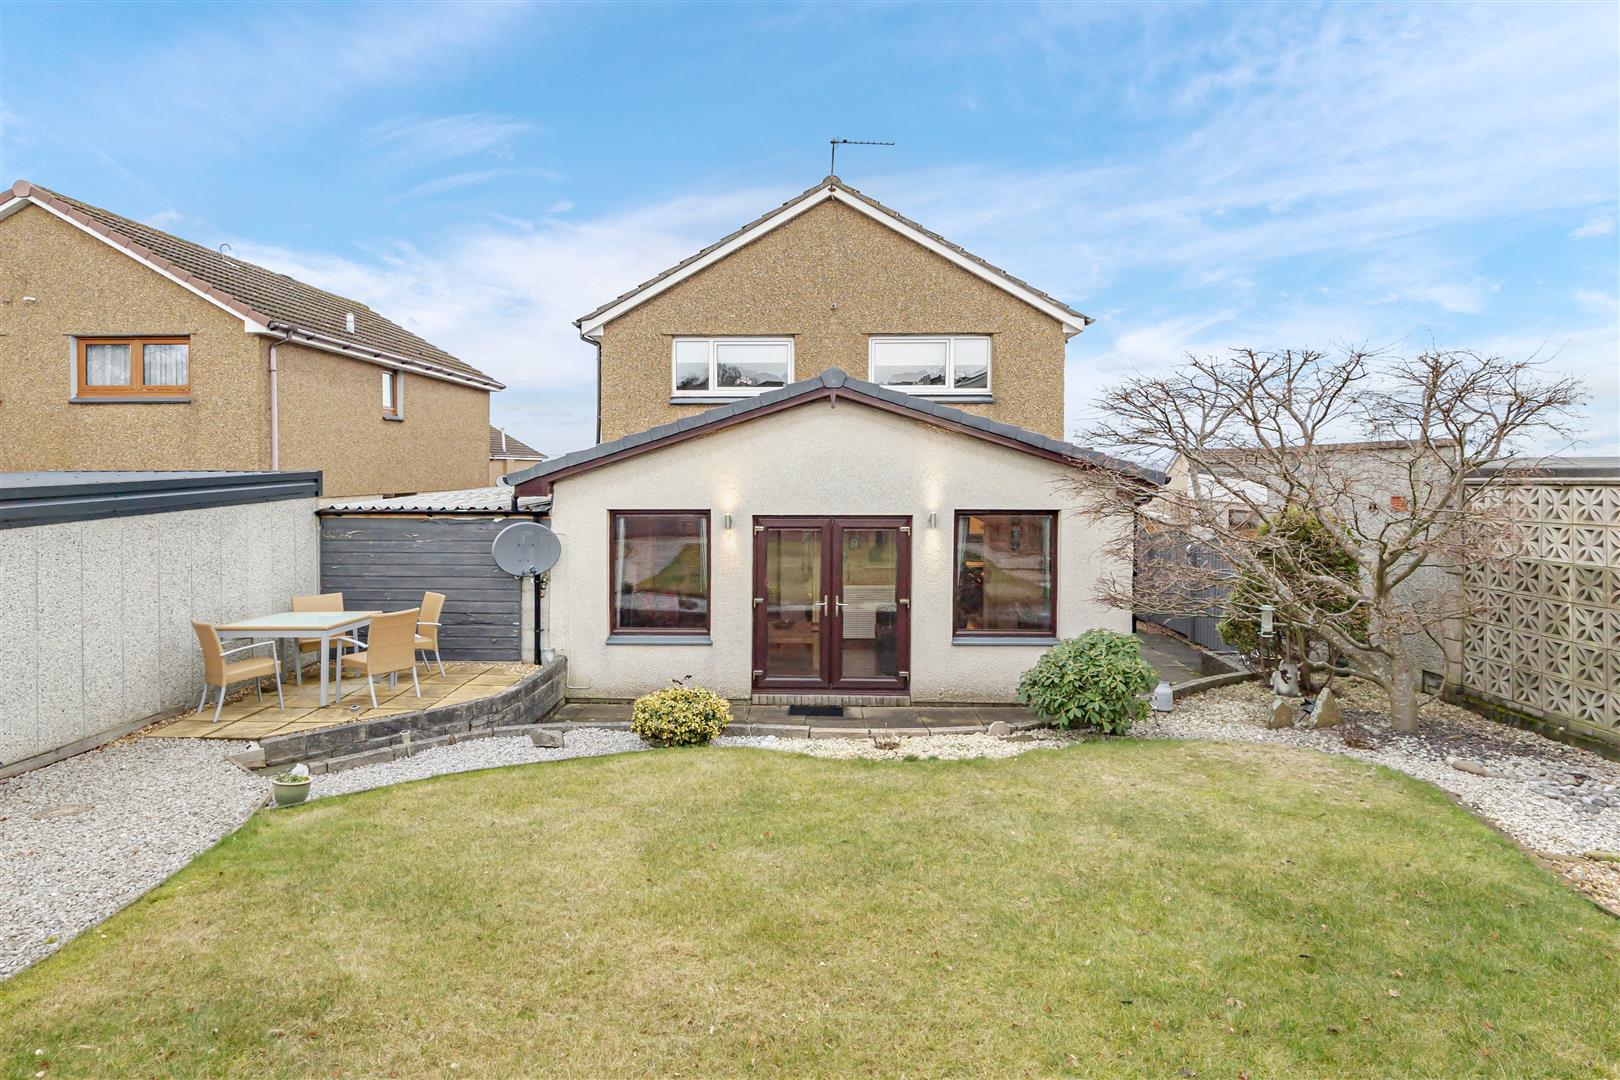 4 bed detached house for sale in Viewforth Drive, Falkirk, FK2 